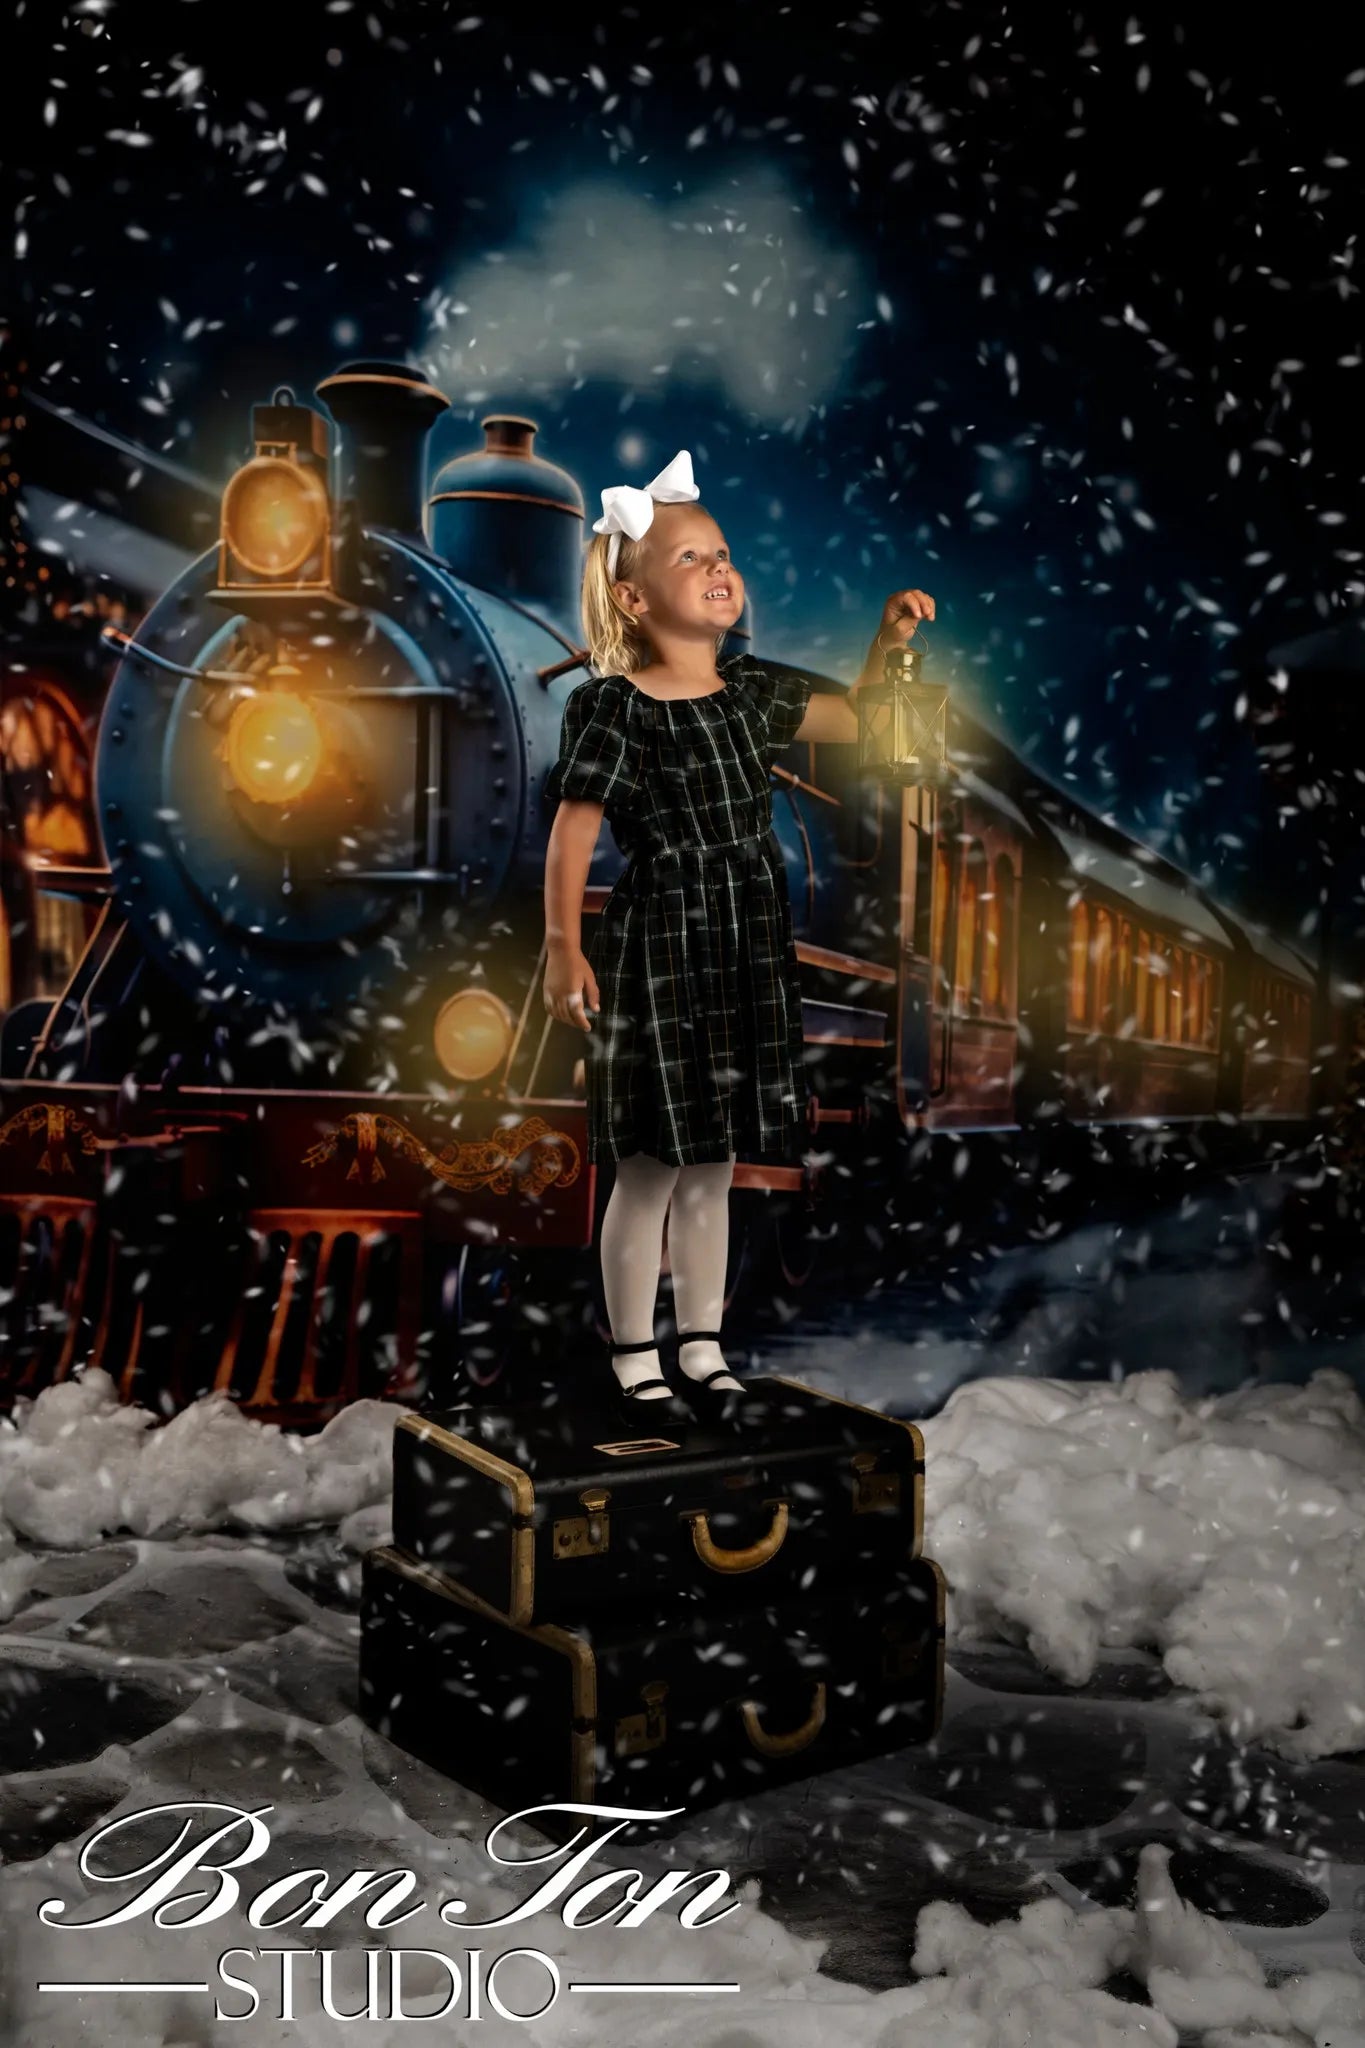 Kate Christmas Winter Train Backdrop for Photography